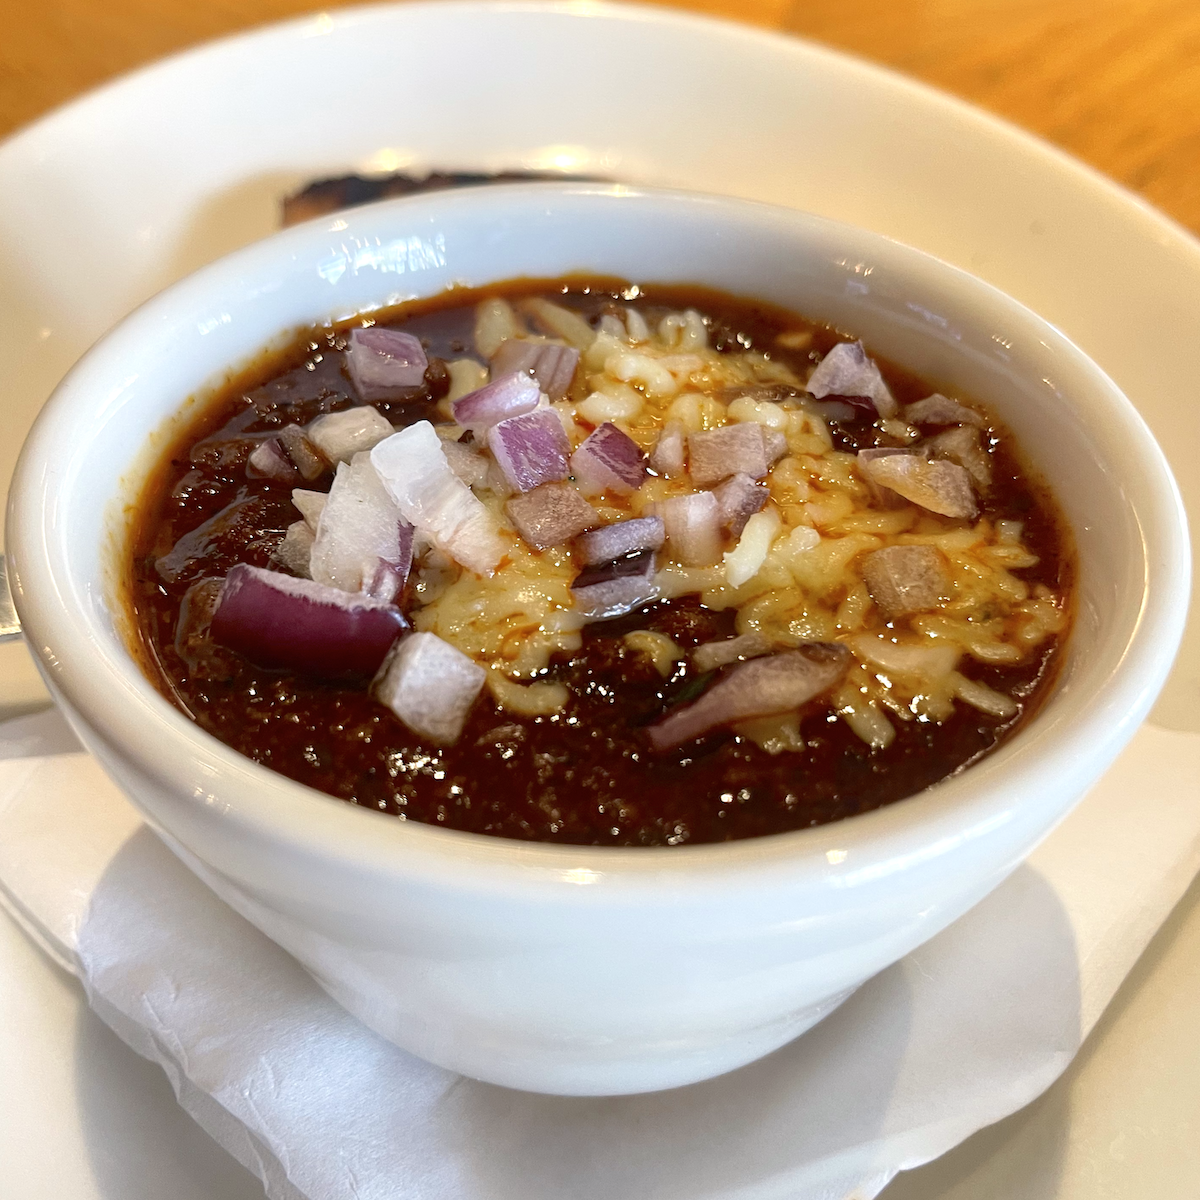 Brisket Chili from Twin Peaks Restaurant in Doral, Florida